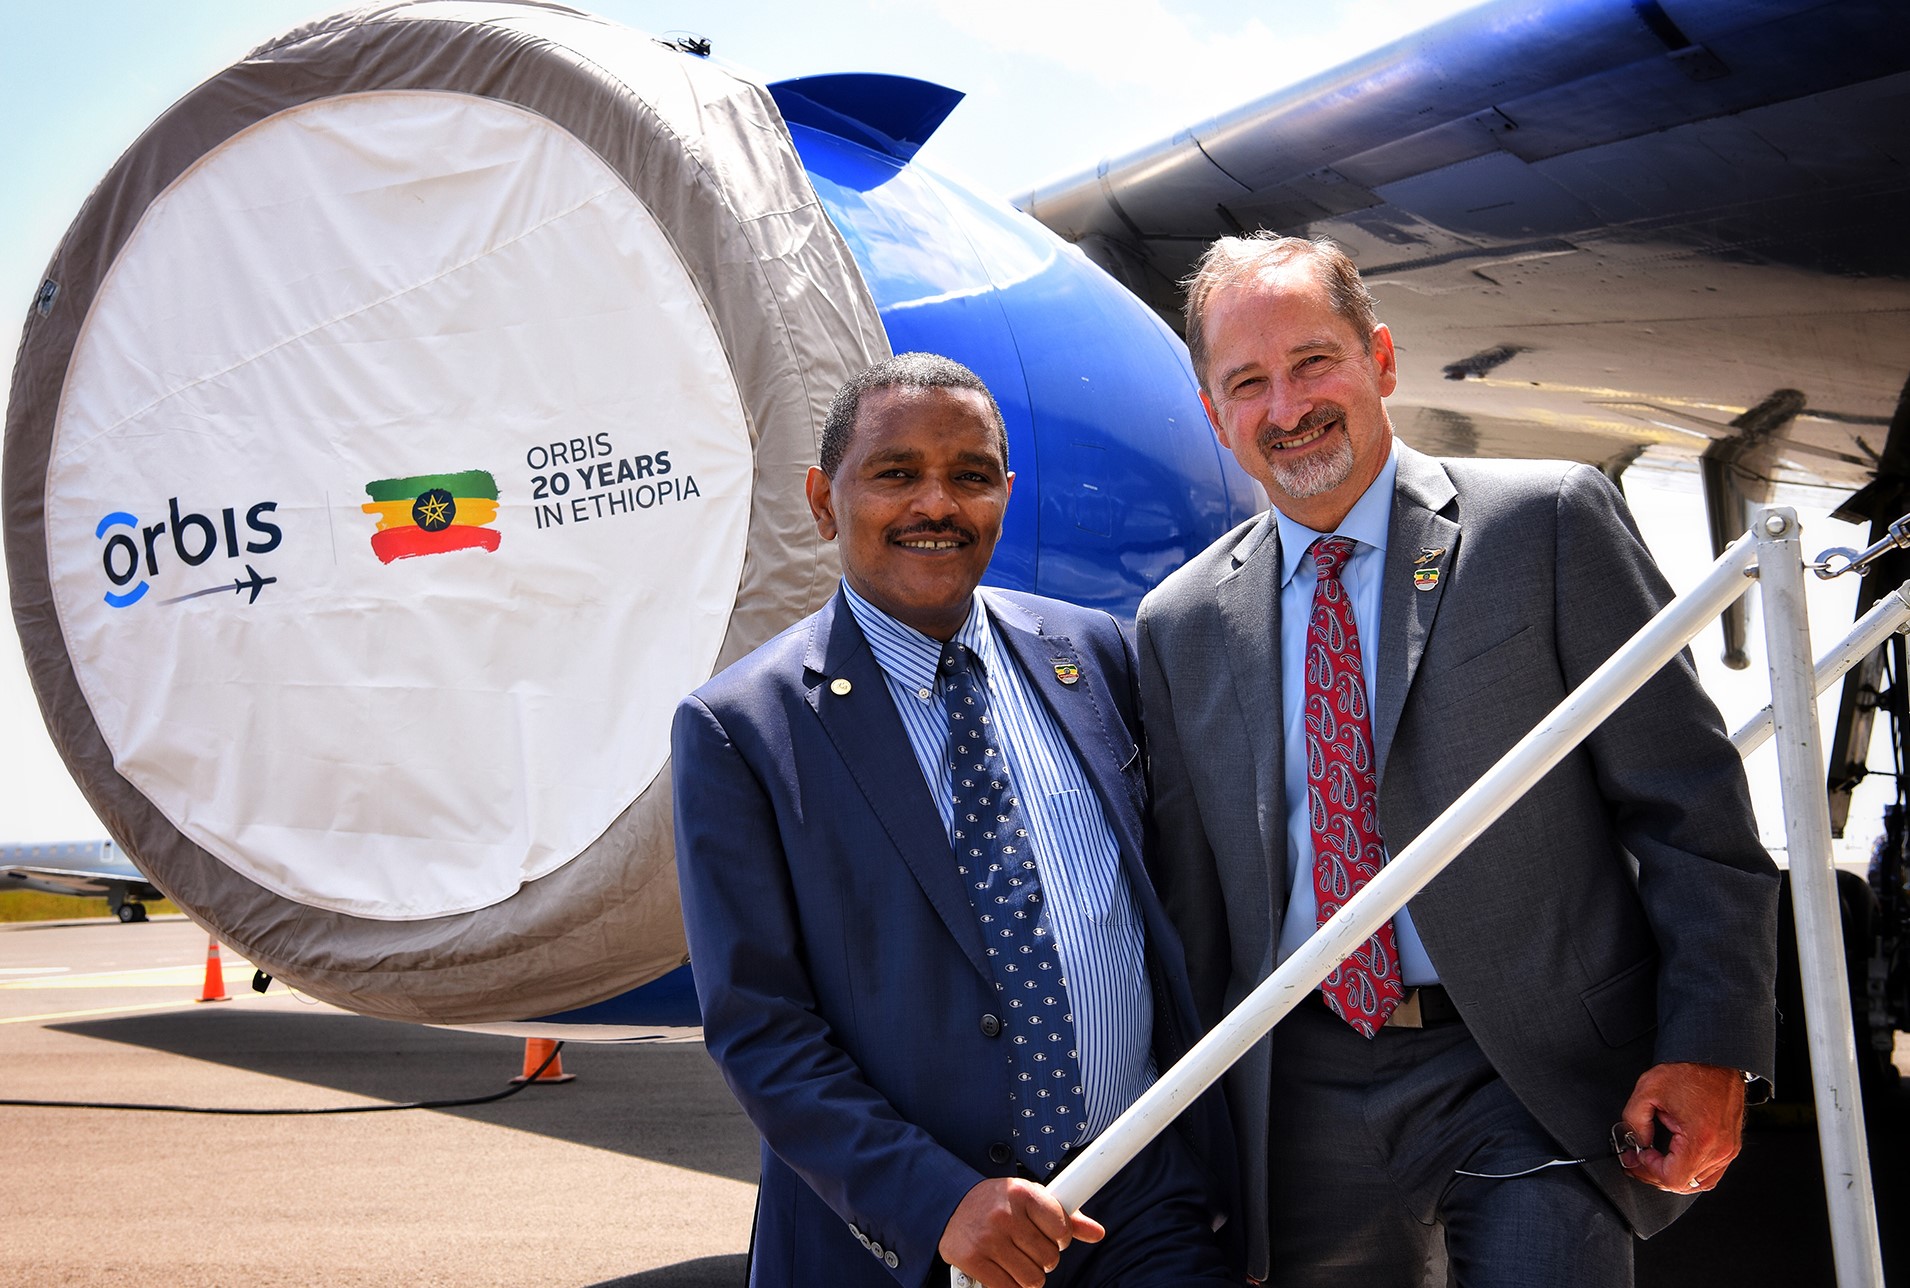 Orbis Flying Eye Hospital Program 
Addis Ababa, Ethiopia - October 1 - 19, 2018
Sponsored by the Alcon Foundation
--
Bob Ranck and the Honorable Dr. Kebede Worku, State Minister, Federal Minister of Health on the steps of the FEH at Bole International airport after the Opening Ceremony to kick off the program.